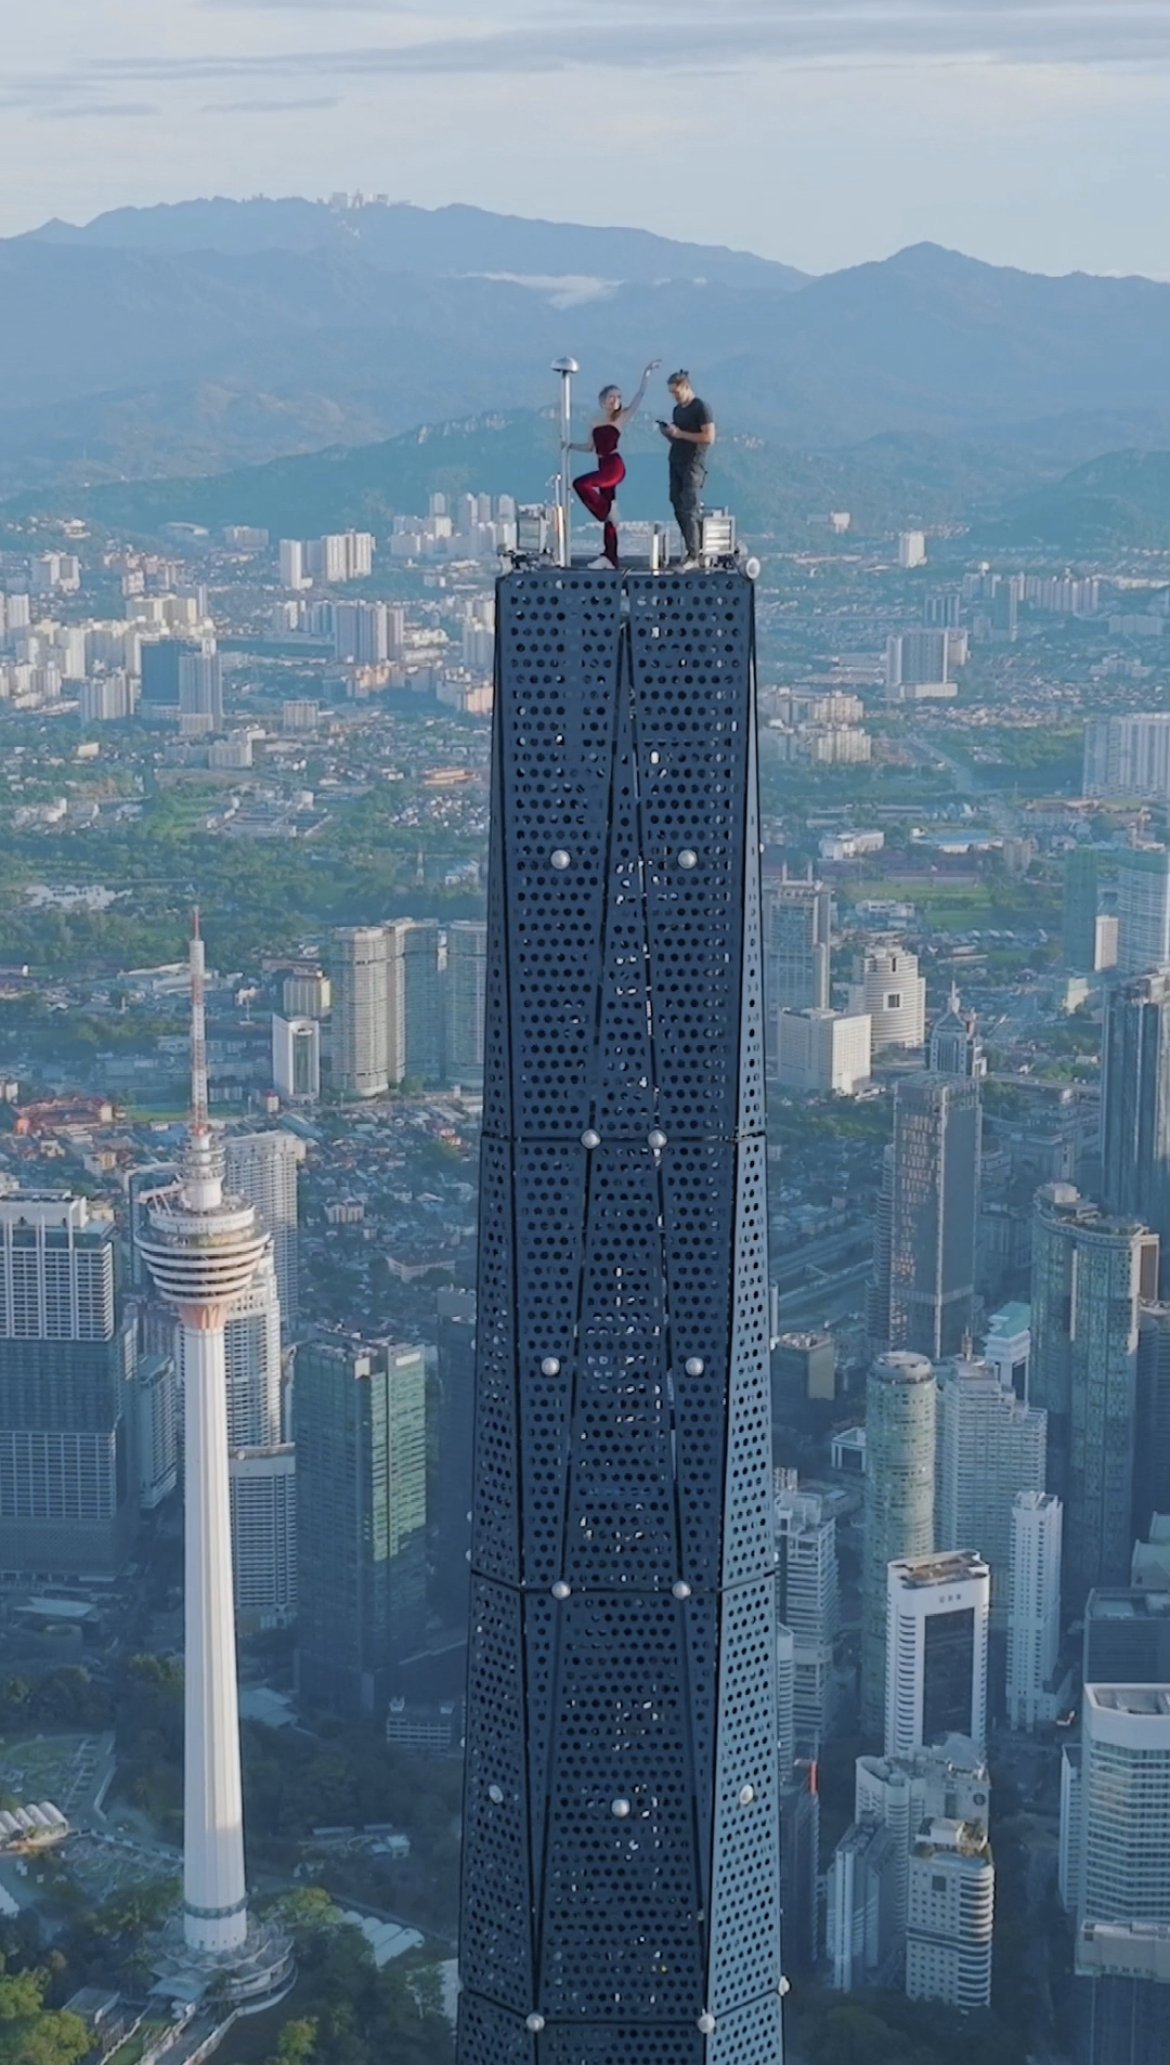 Daredevil couple climb the top of merdeka 118, netizens question the security